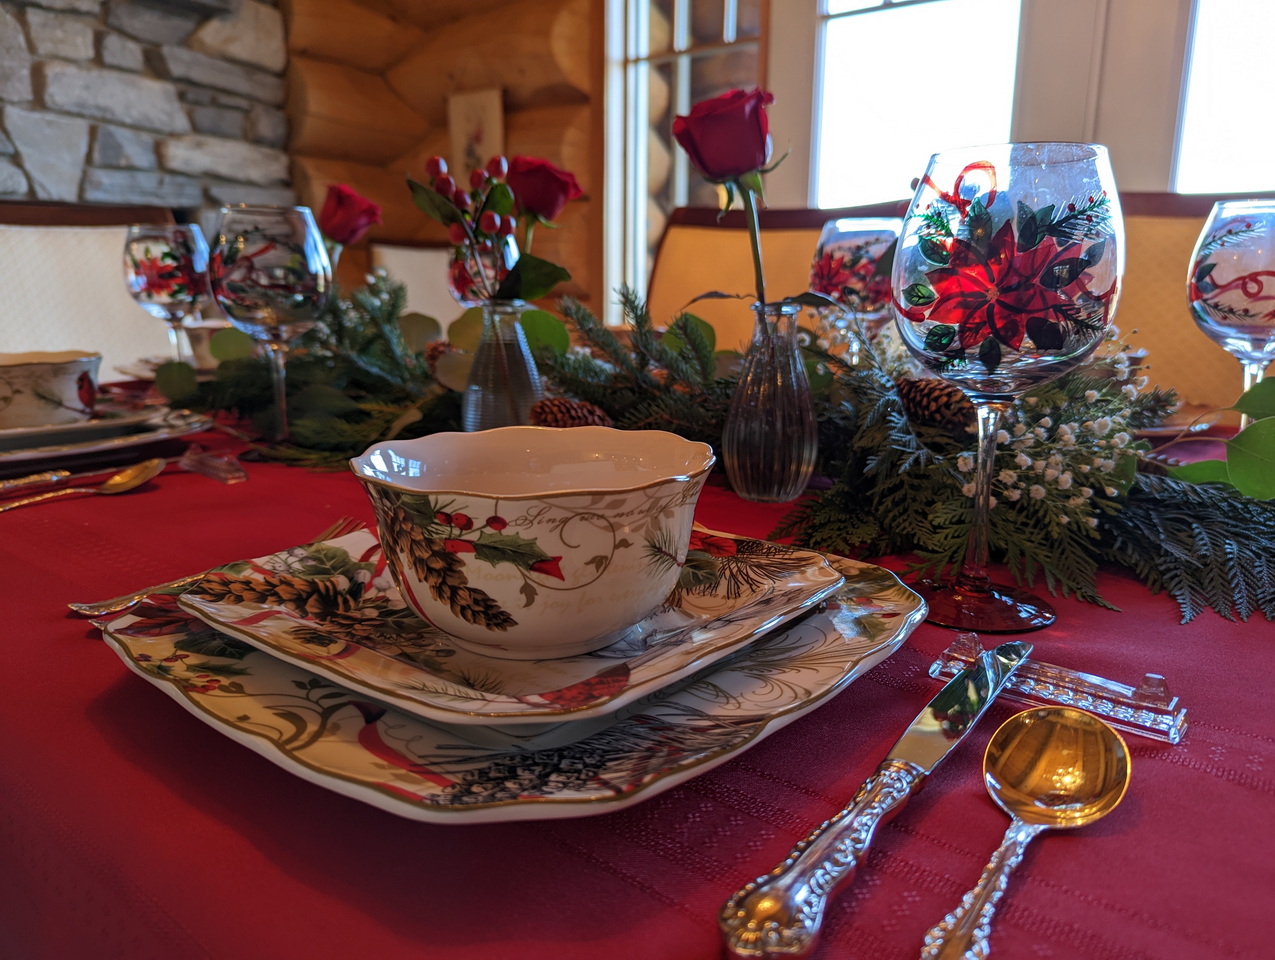 Homes for the Holidays 2022 dining table place setting